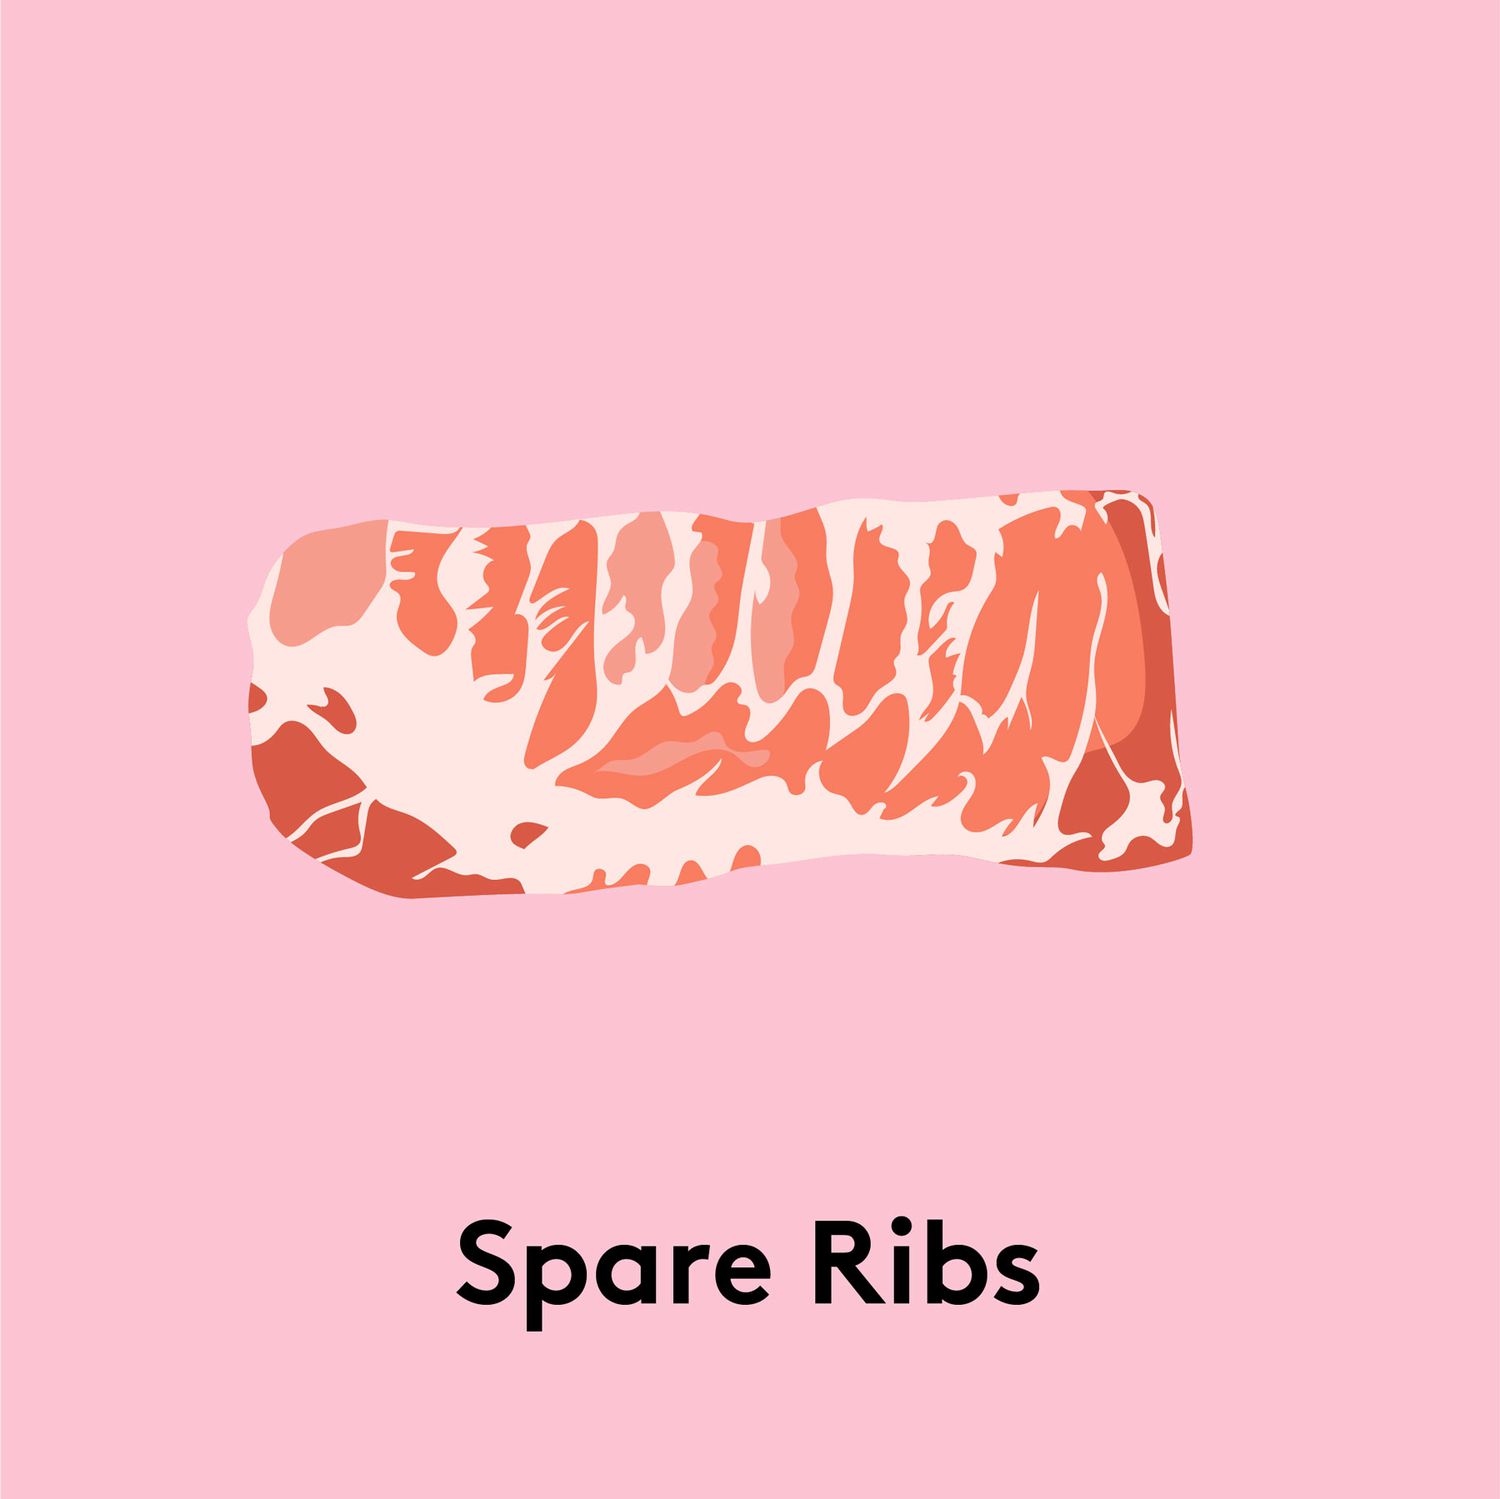 Types of pork cuts - Spare Ribs